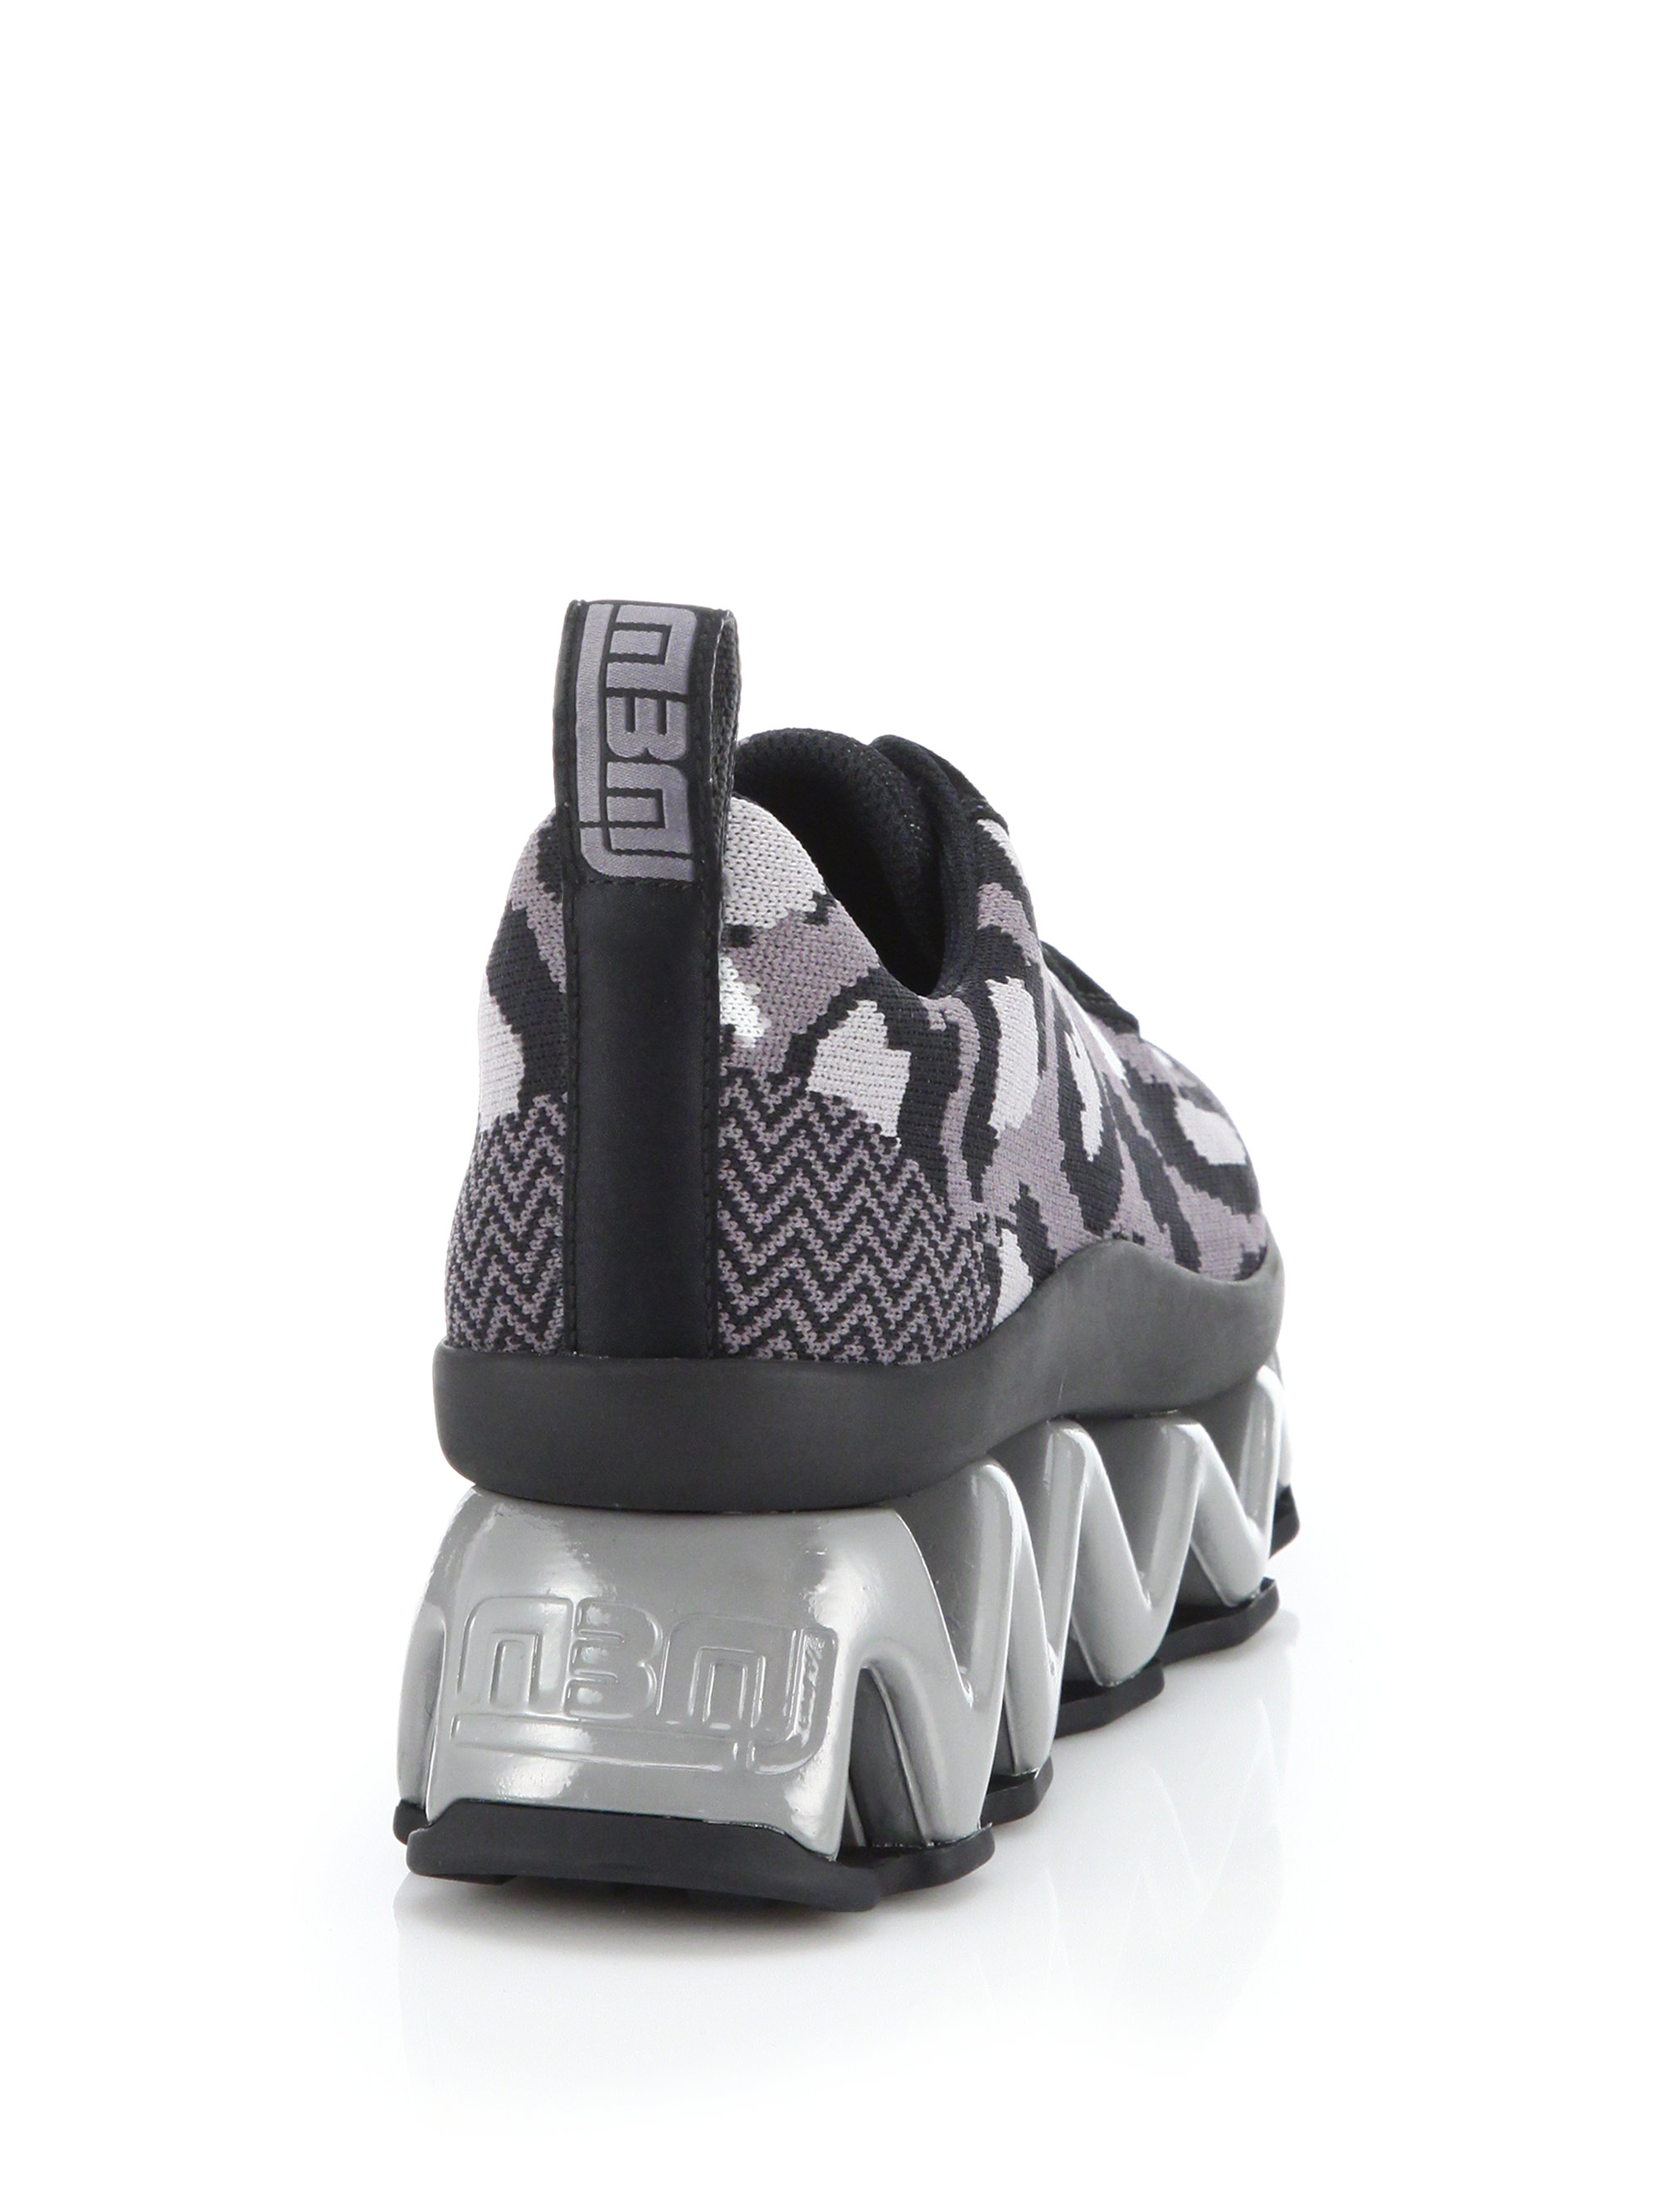 Marc By Marc Jacobs Ninja Wave Textile & Leather Platform Sneakers in Grey  (Black) - Lyst